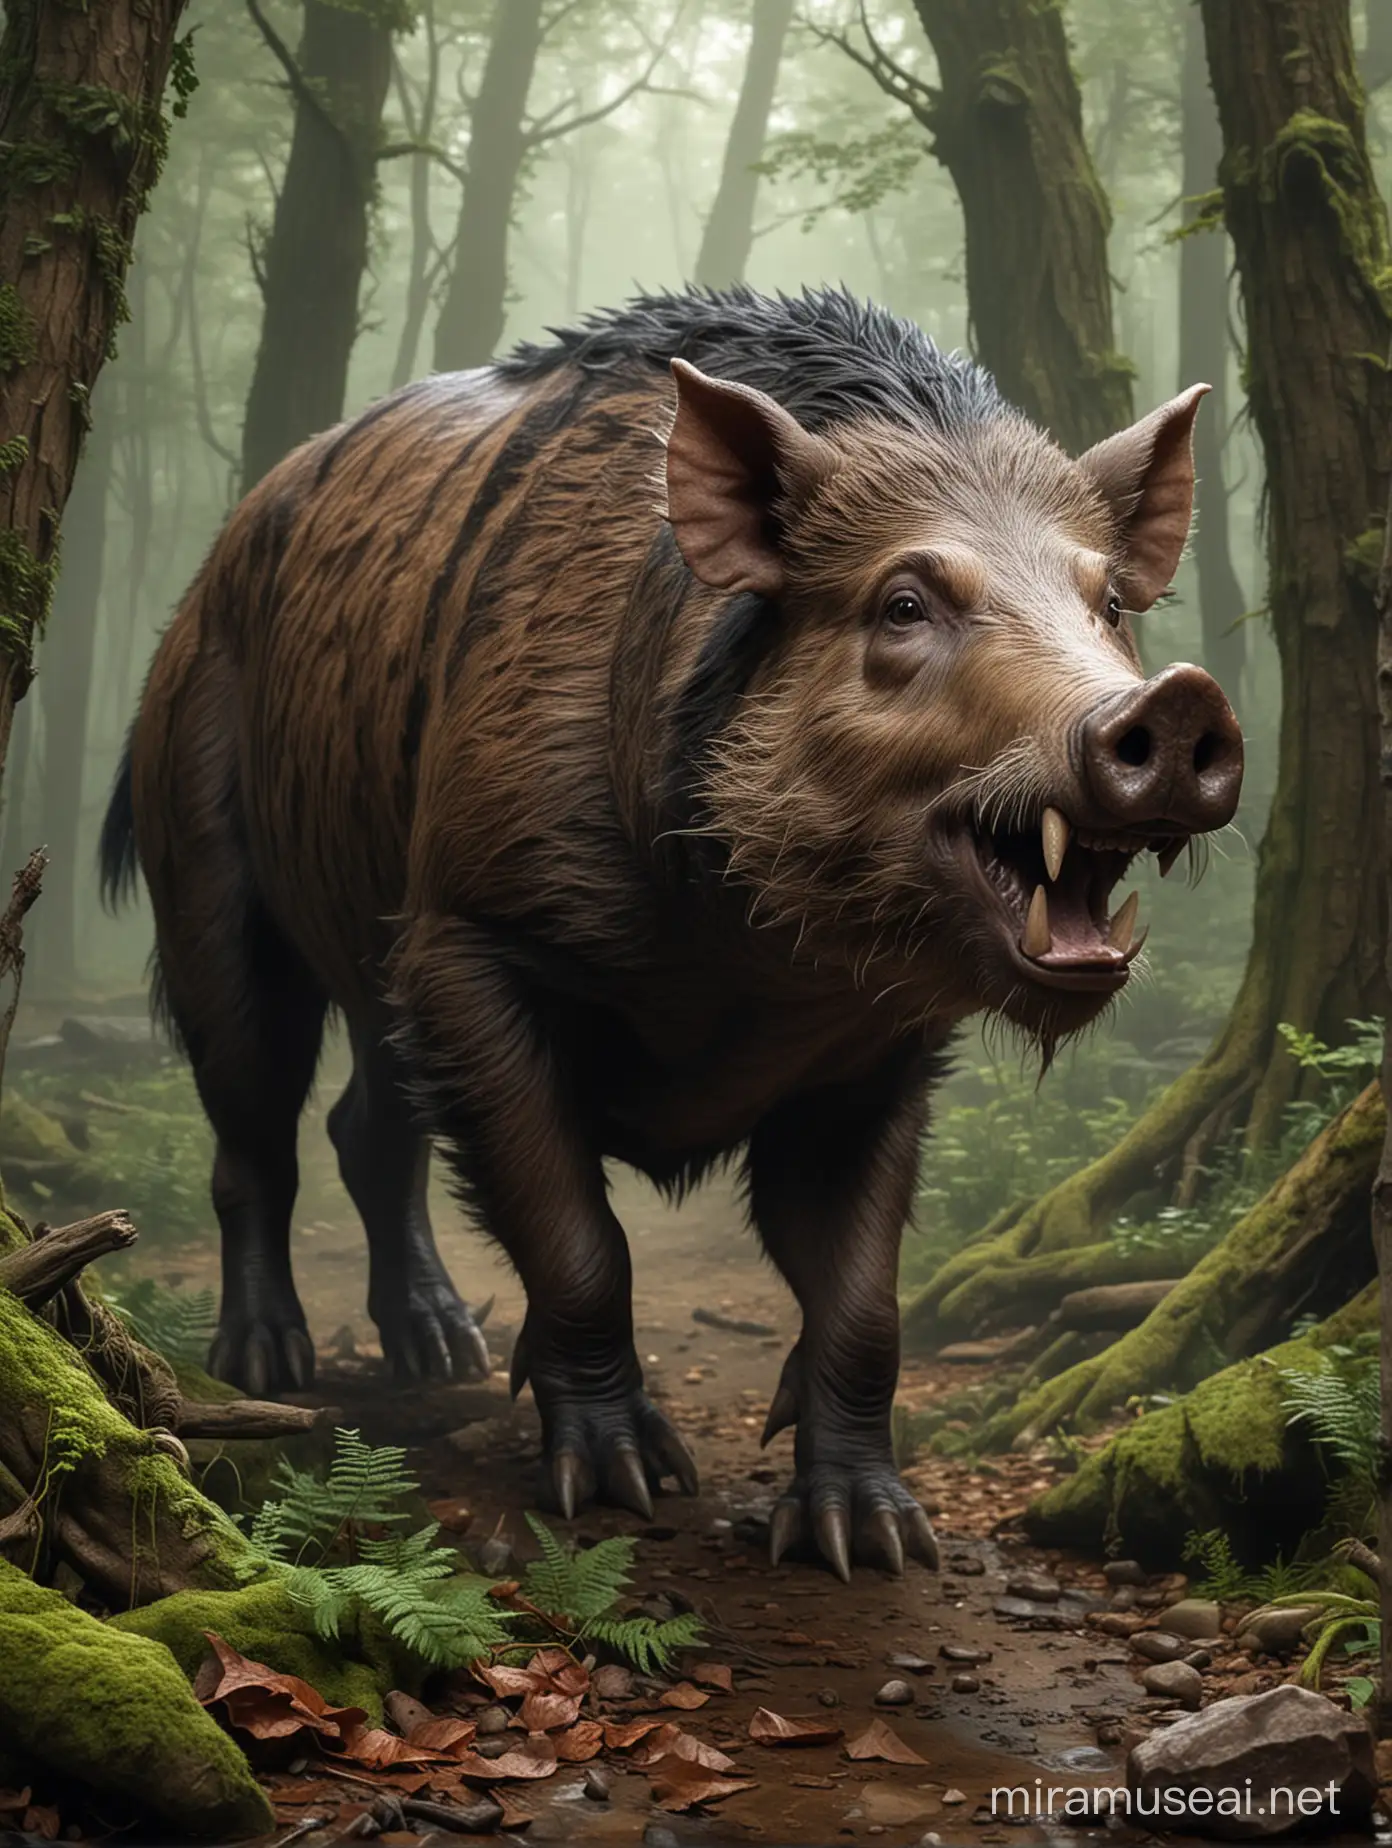 Create a realistic boar from dungeons and dragons. He will be in a forest.